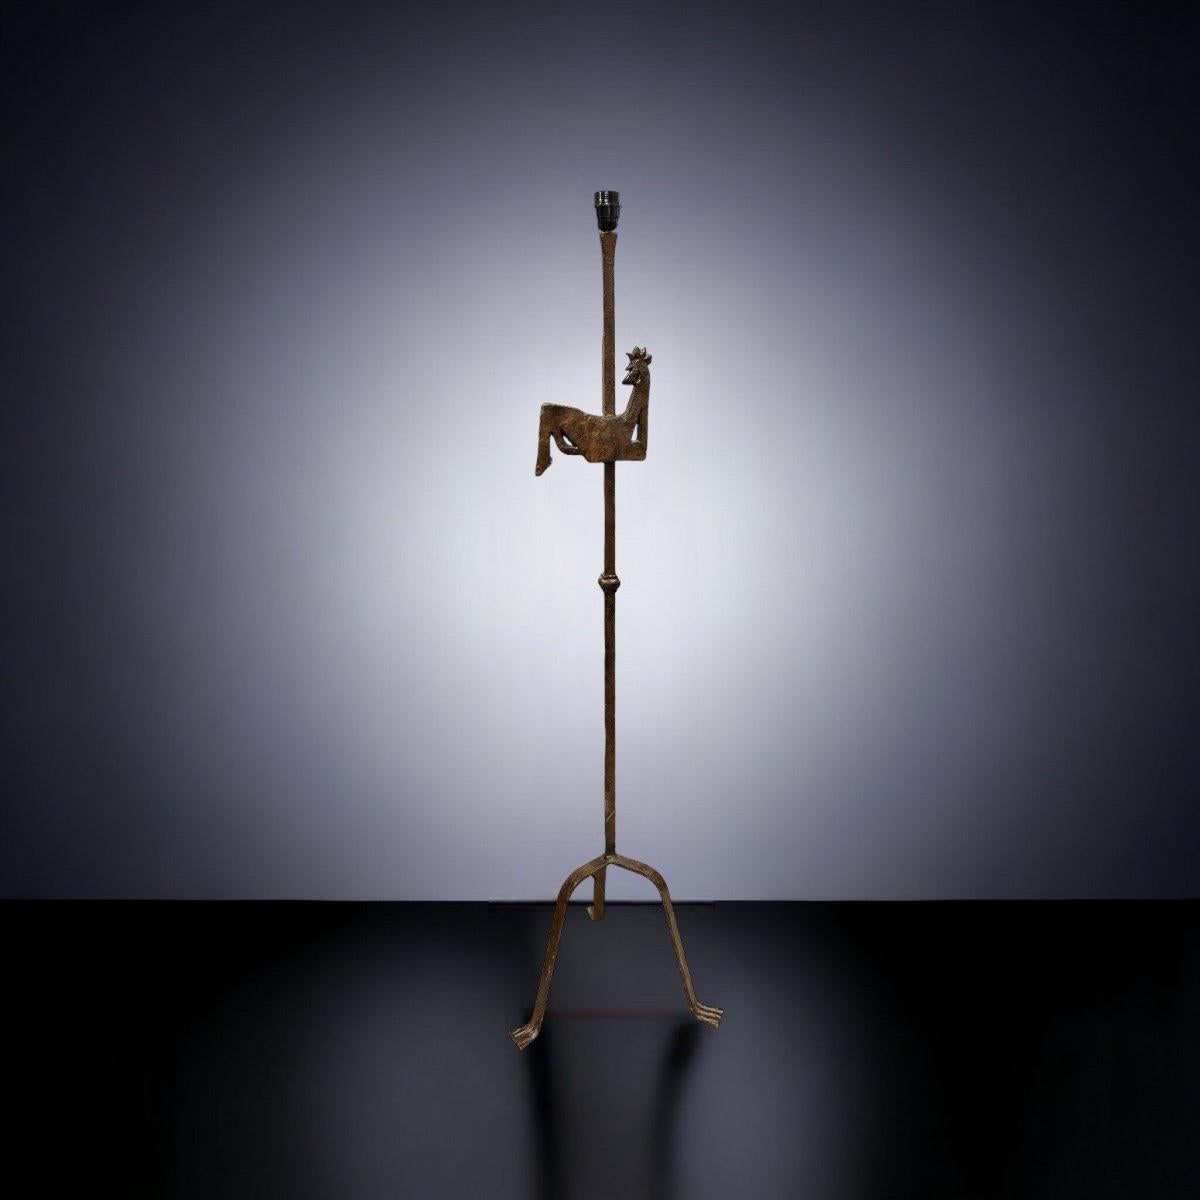 Wrought-iron floor lamp attributed to Jean Touret for Atelier Marolles, France, circa 1955. Rare large (140 cm) wrought-iron floor lamp with painted finish. Good condition. Sold without shade.

Known to insiders, particularly for his work in sacred